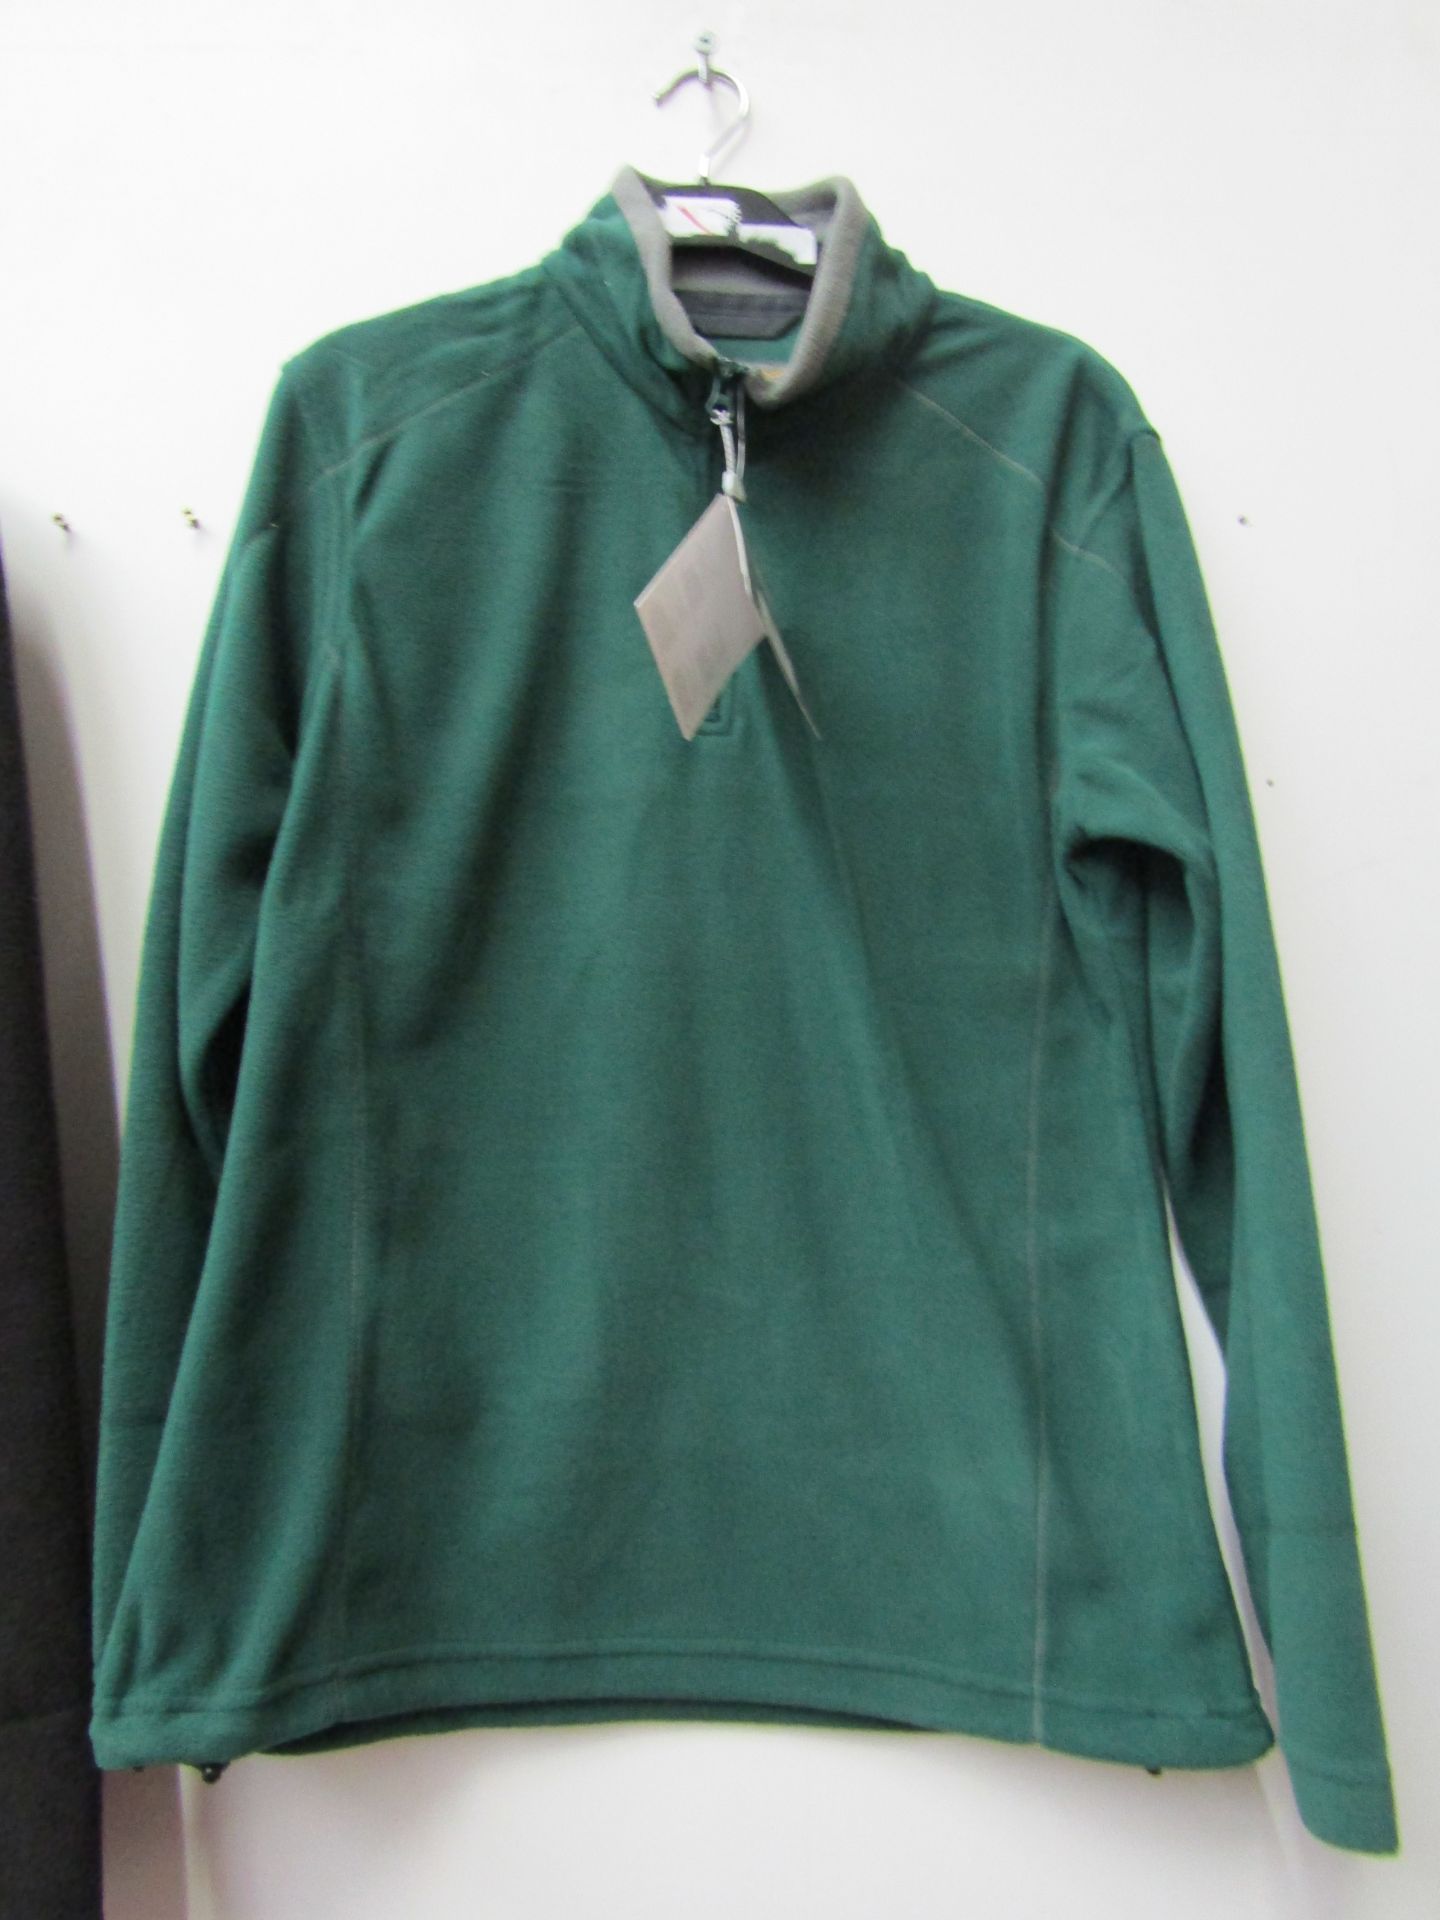 Regatta Professional Ladies Ashville Green Fleece, size 12, new and packaged.